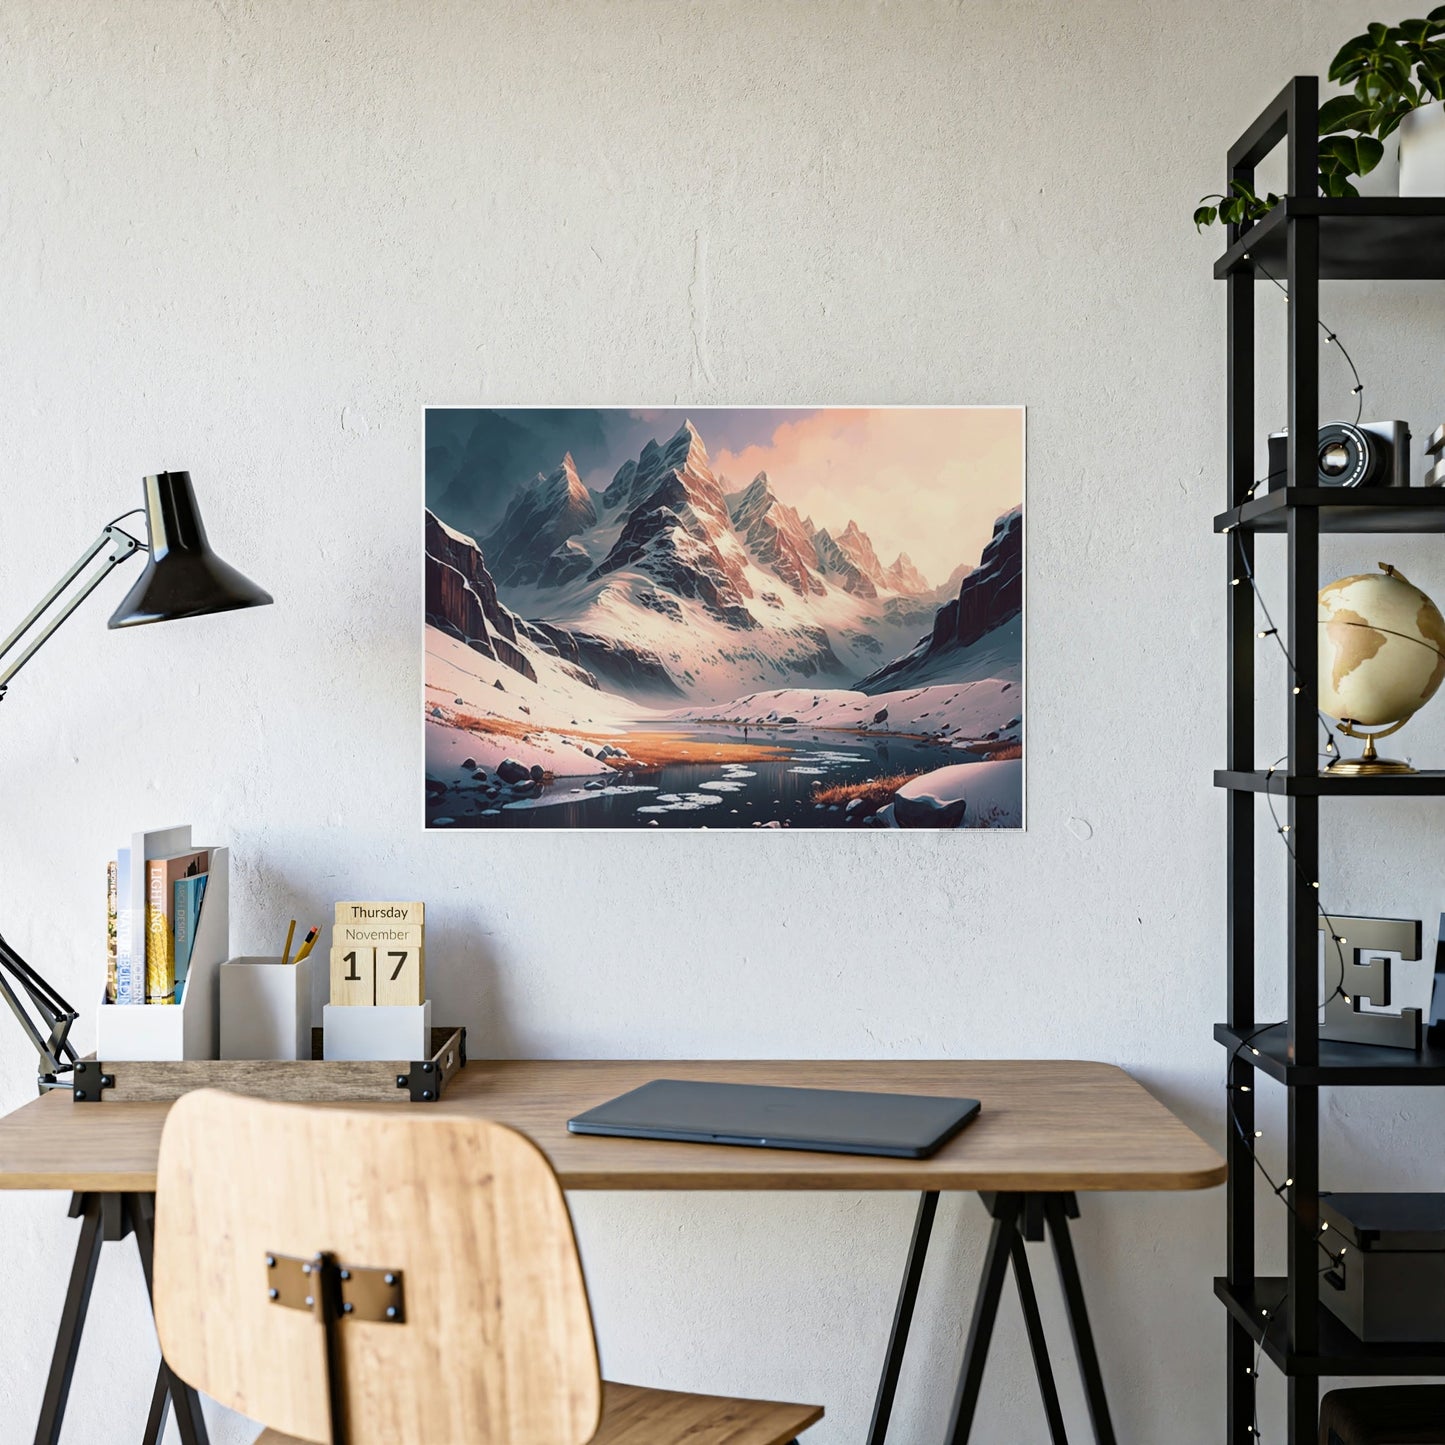 A Breathtaking View: An Artistic Expression of Mountain Landscapes on Canvas